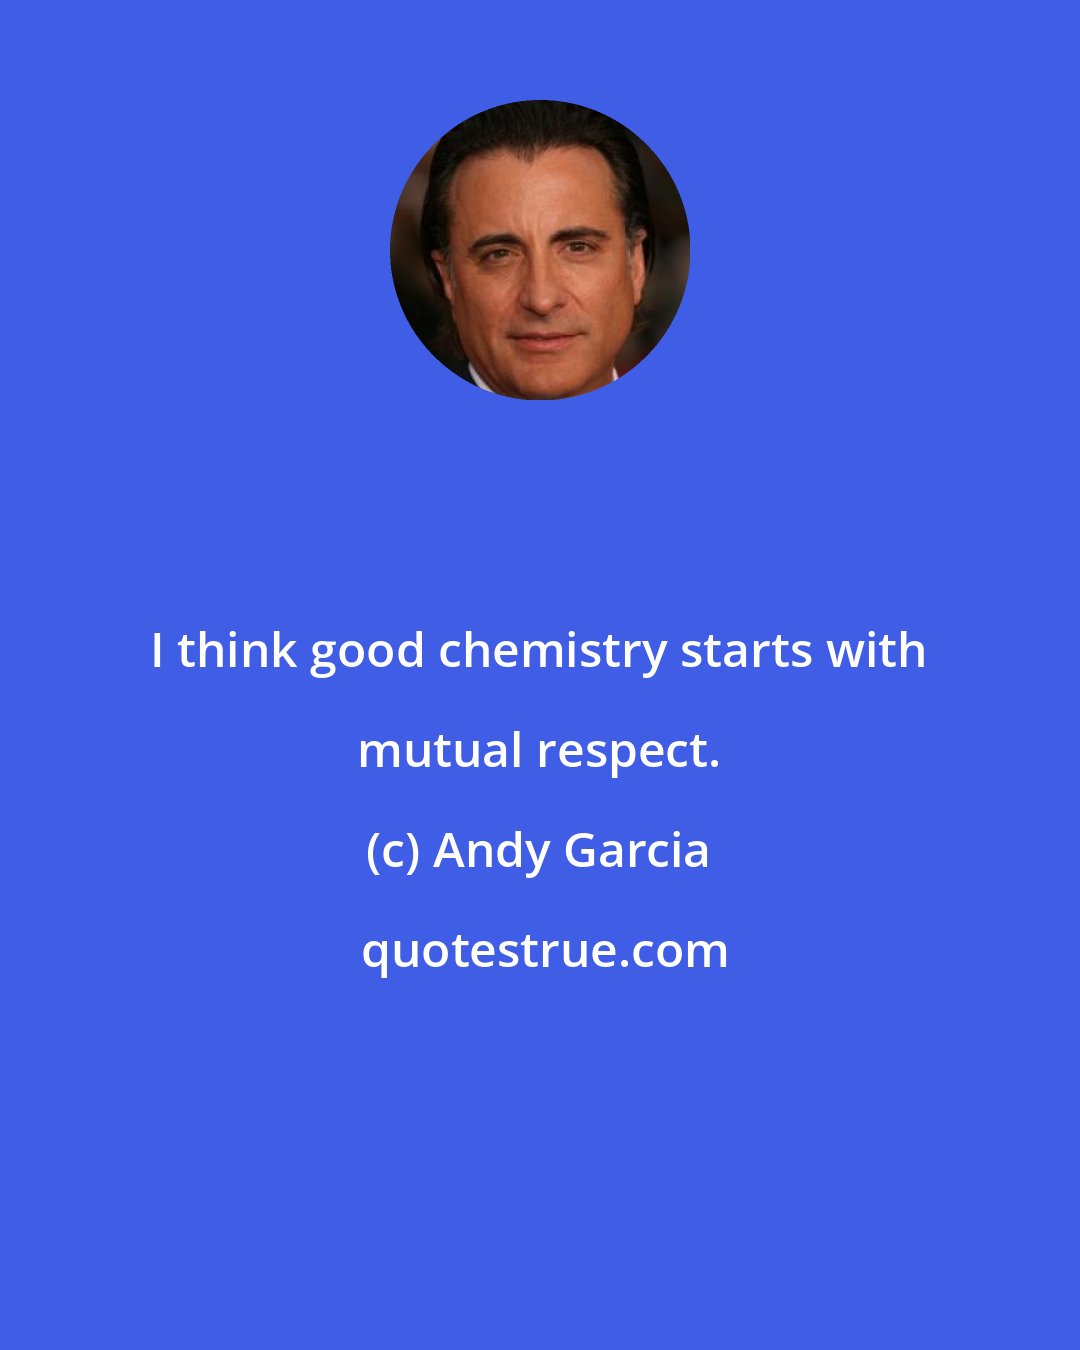 Andy Garcia: I think good chemistry starts with mutual respect.